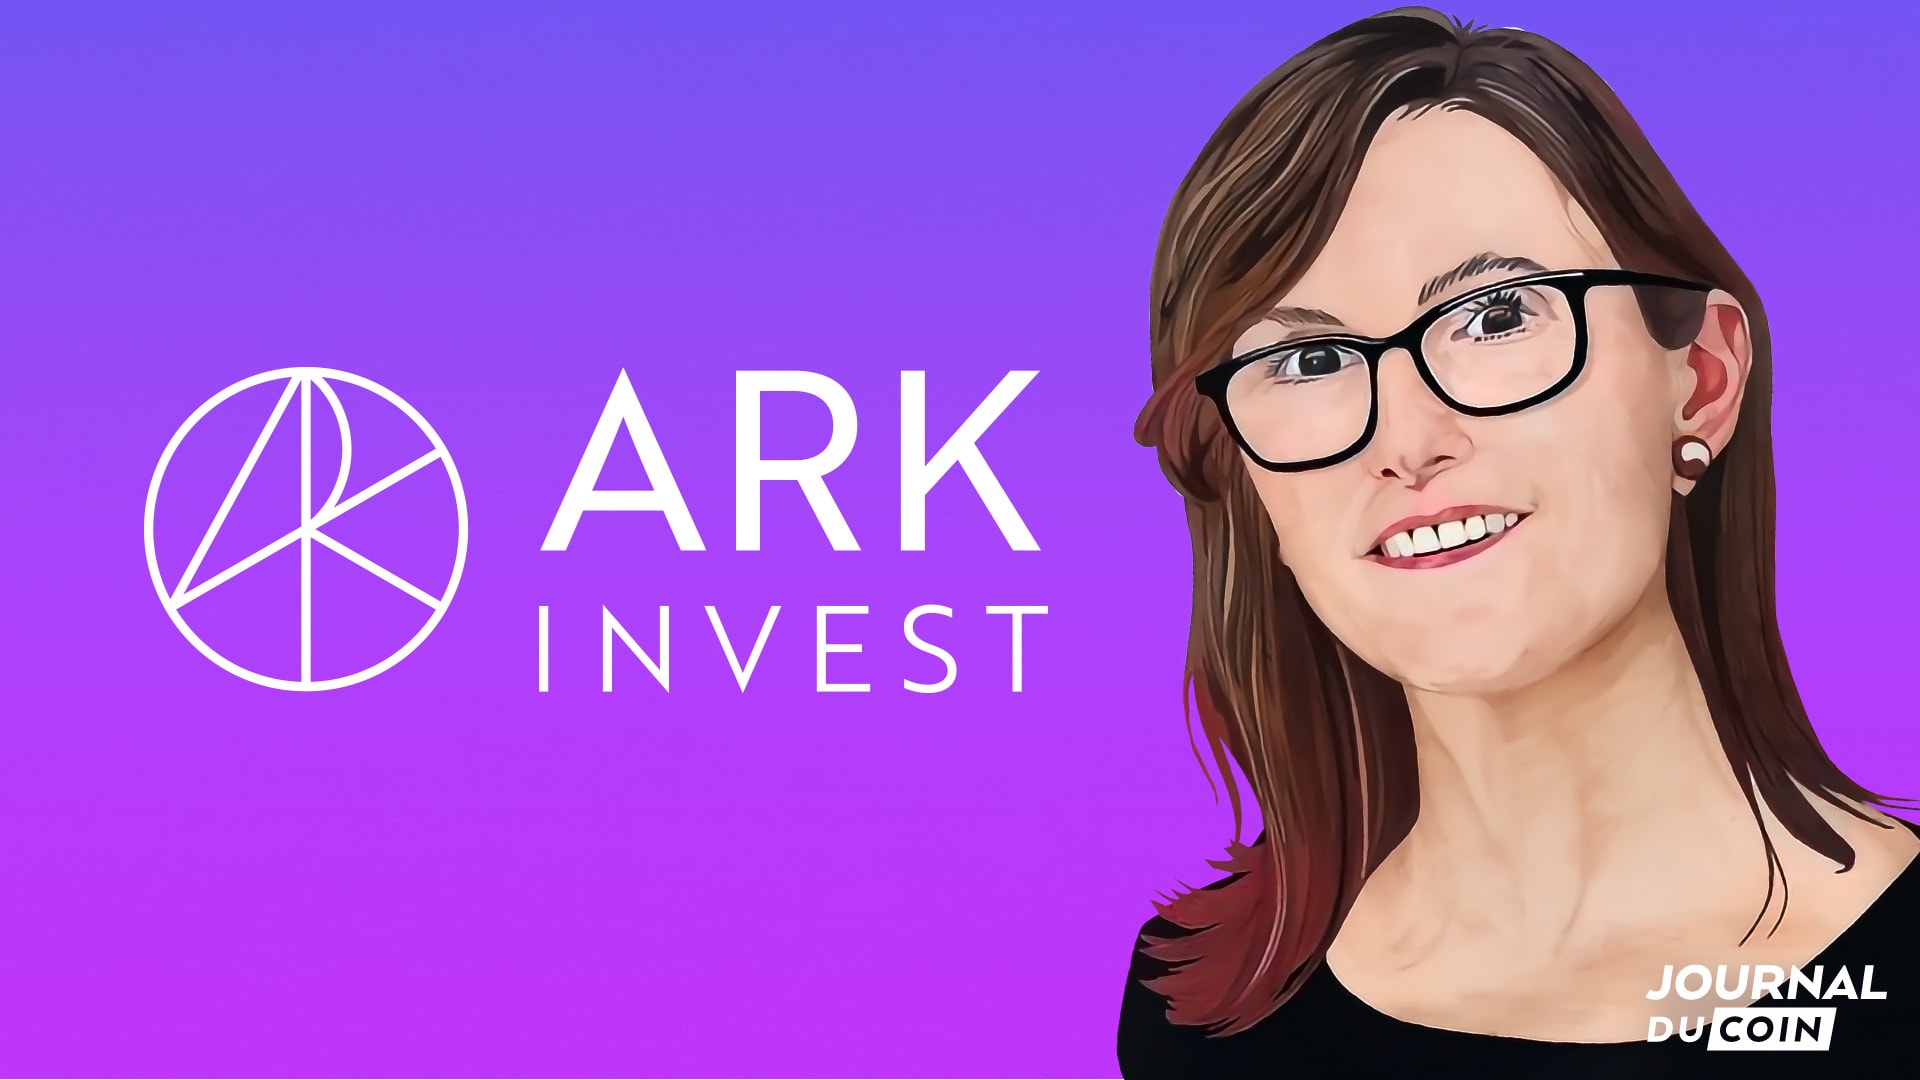 Cathie Wood CEO of Ark Invest